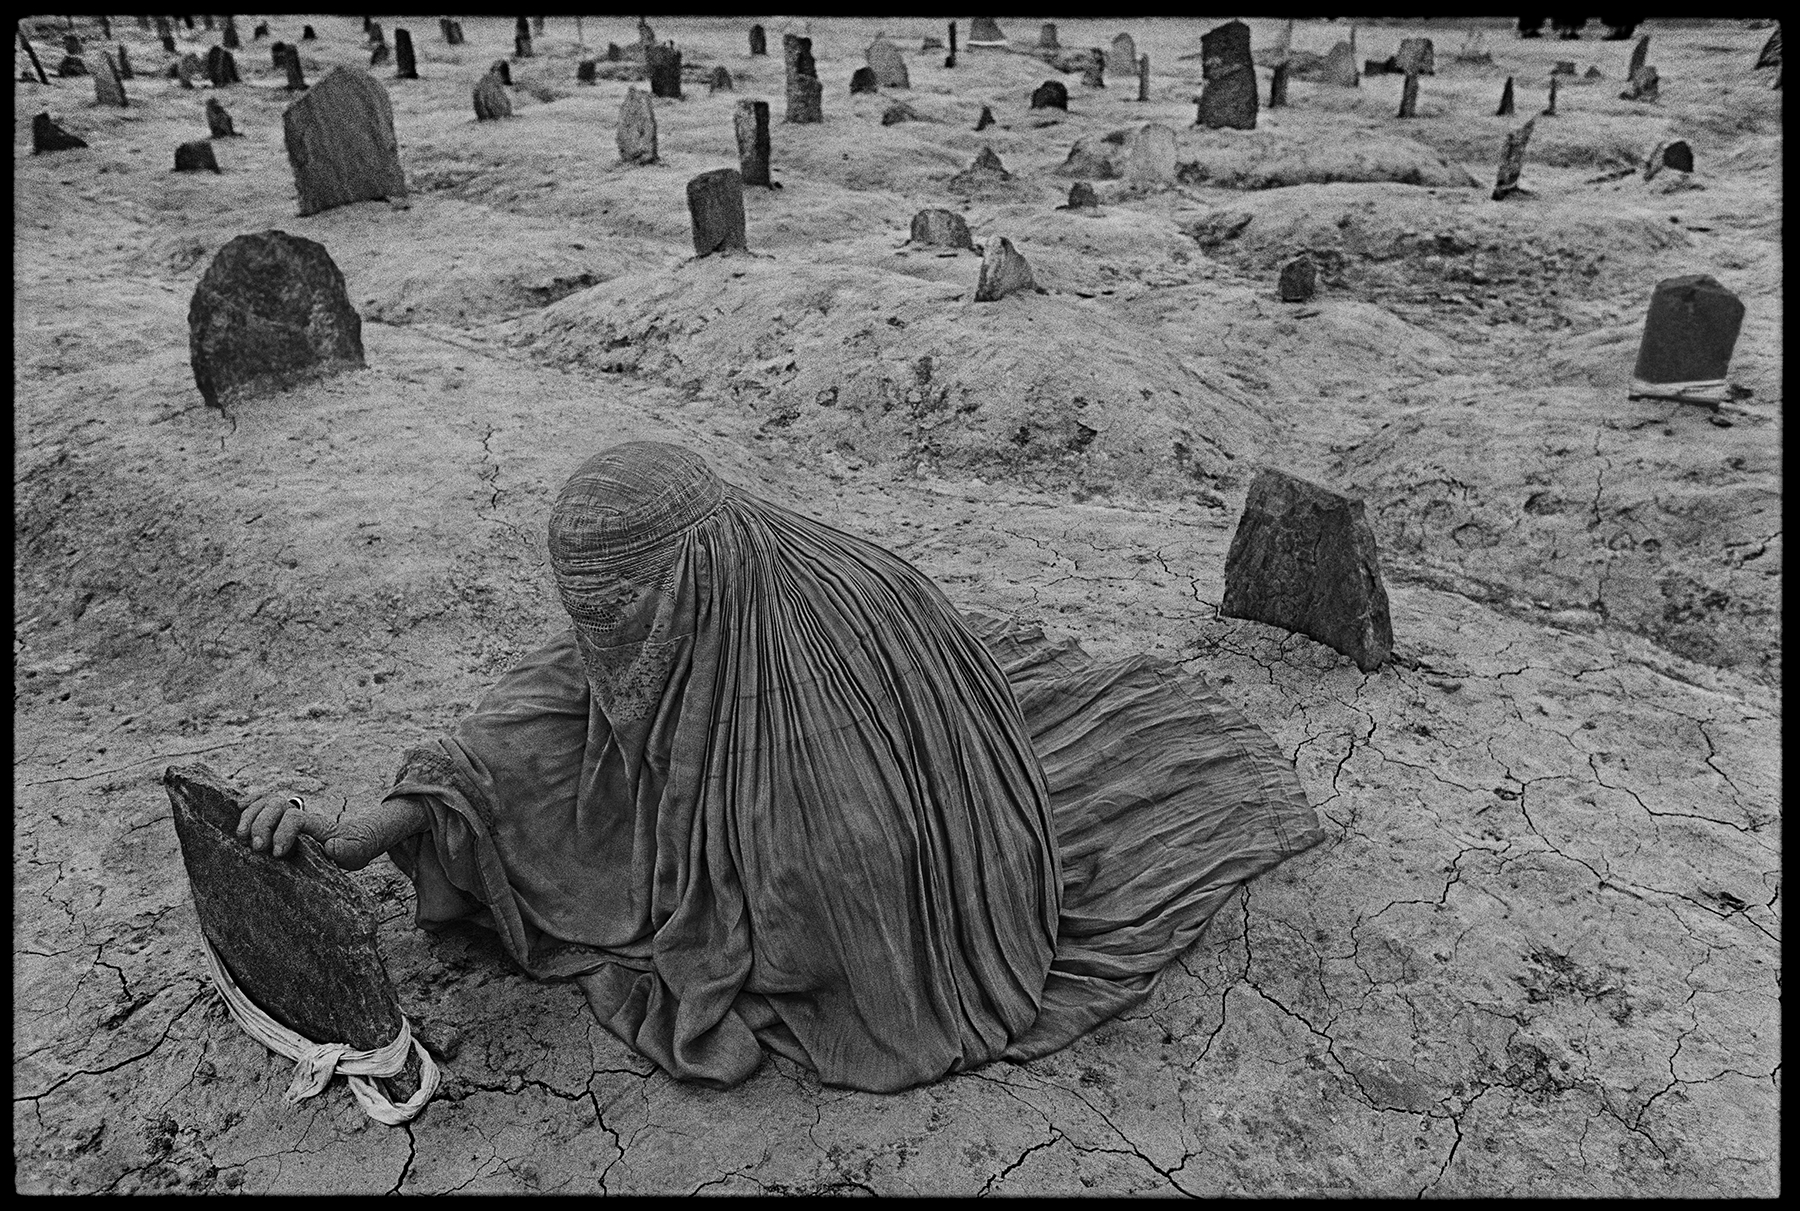 Mourning a brother killed by a Taliban rocket, Afghanistan, 1996